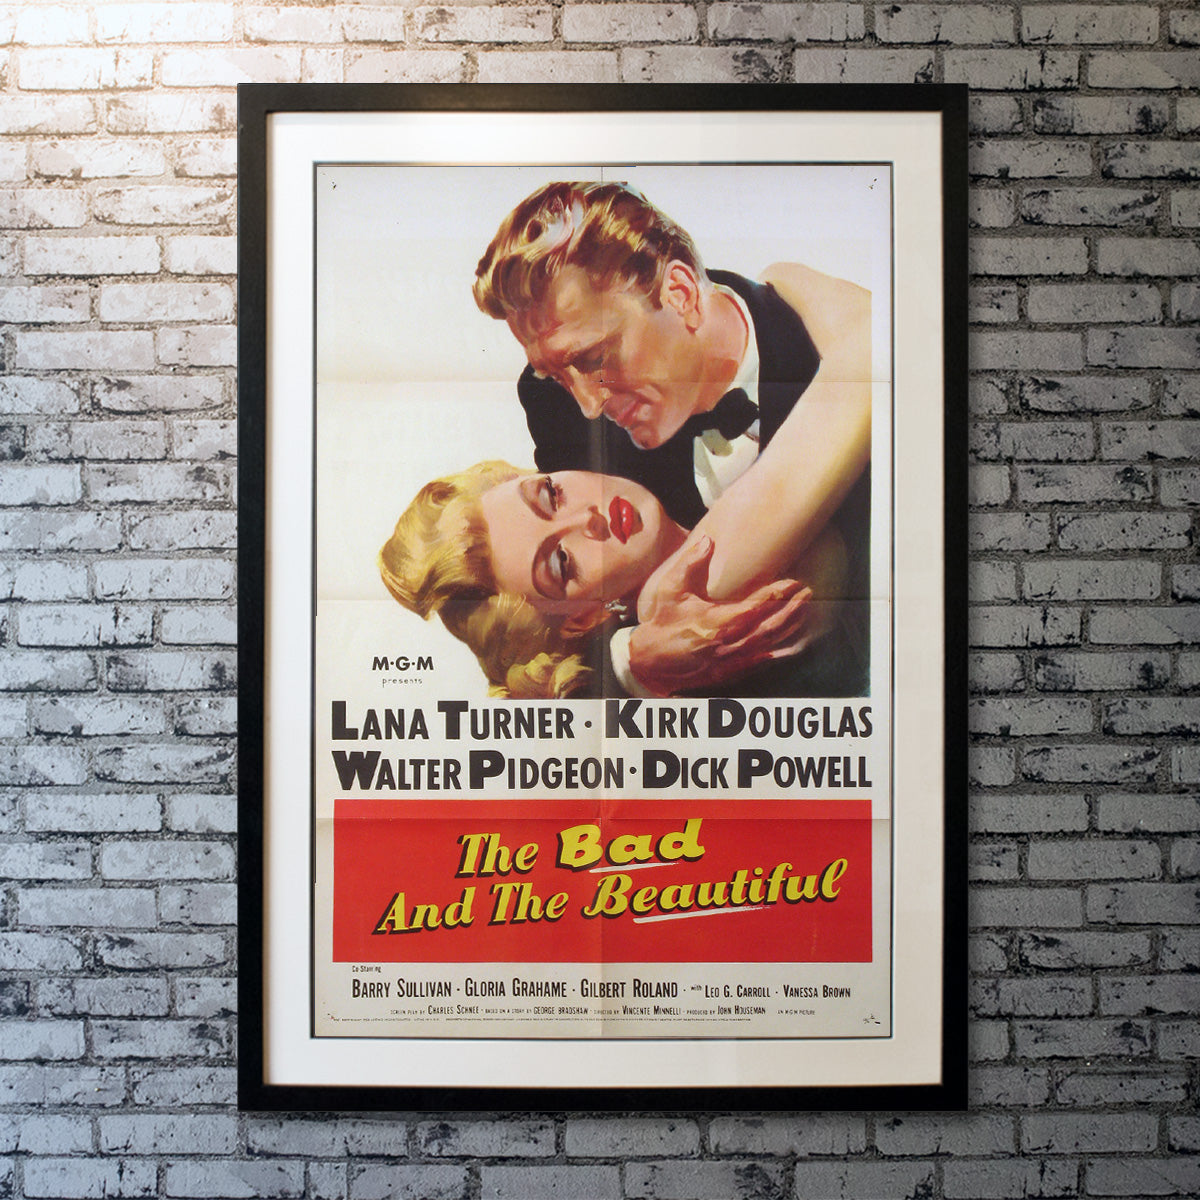 Bad and The Beautiful, The (1952)